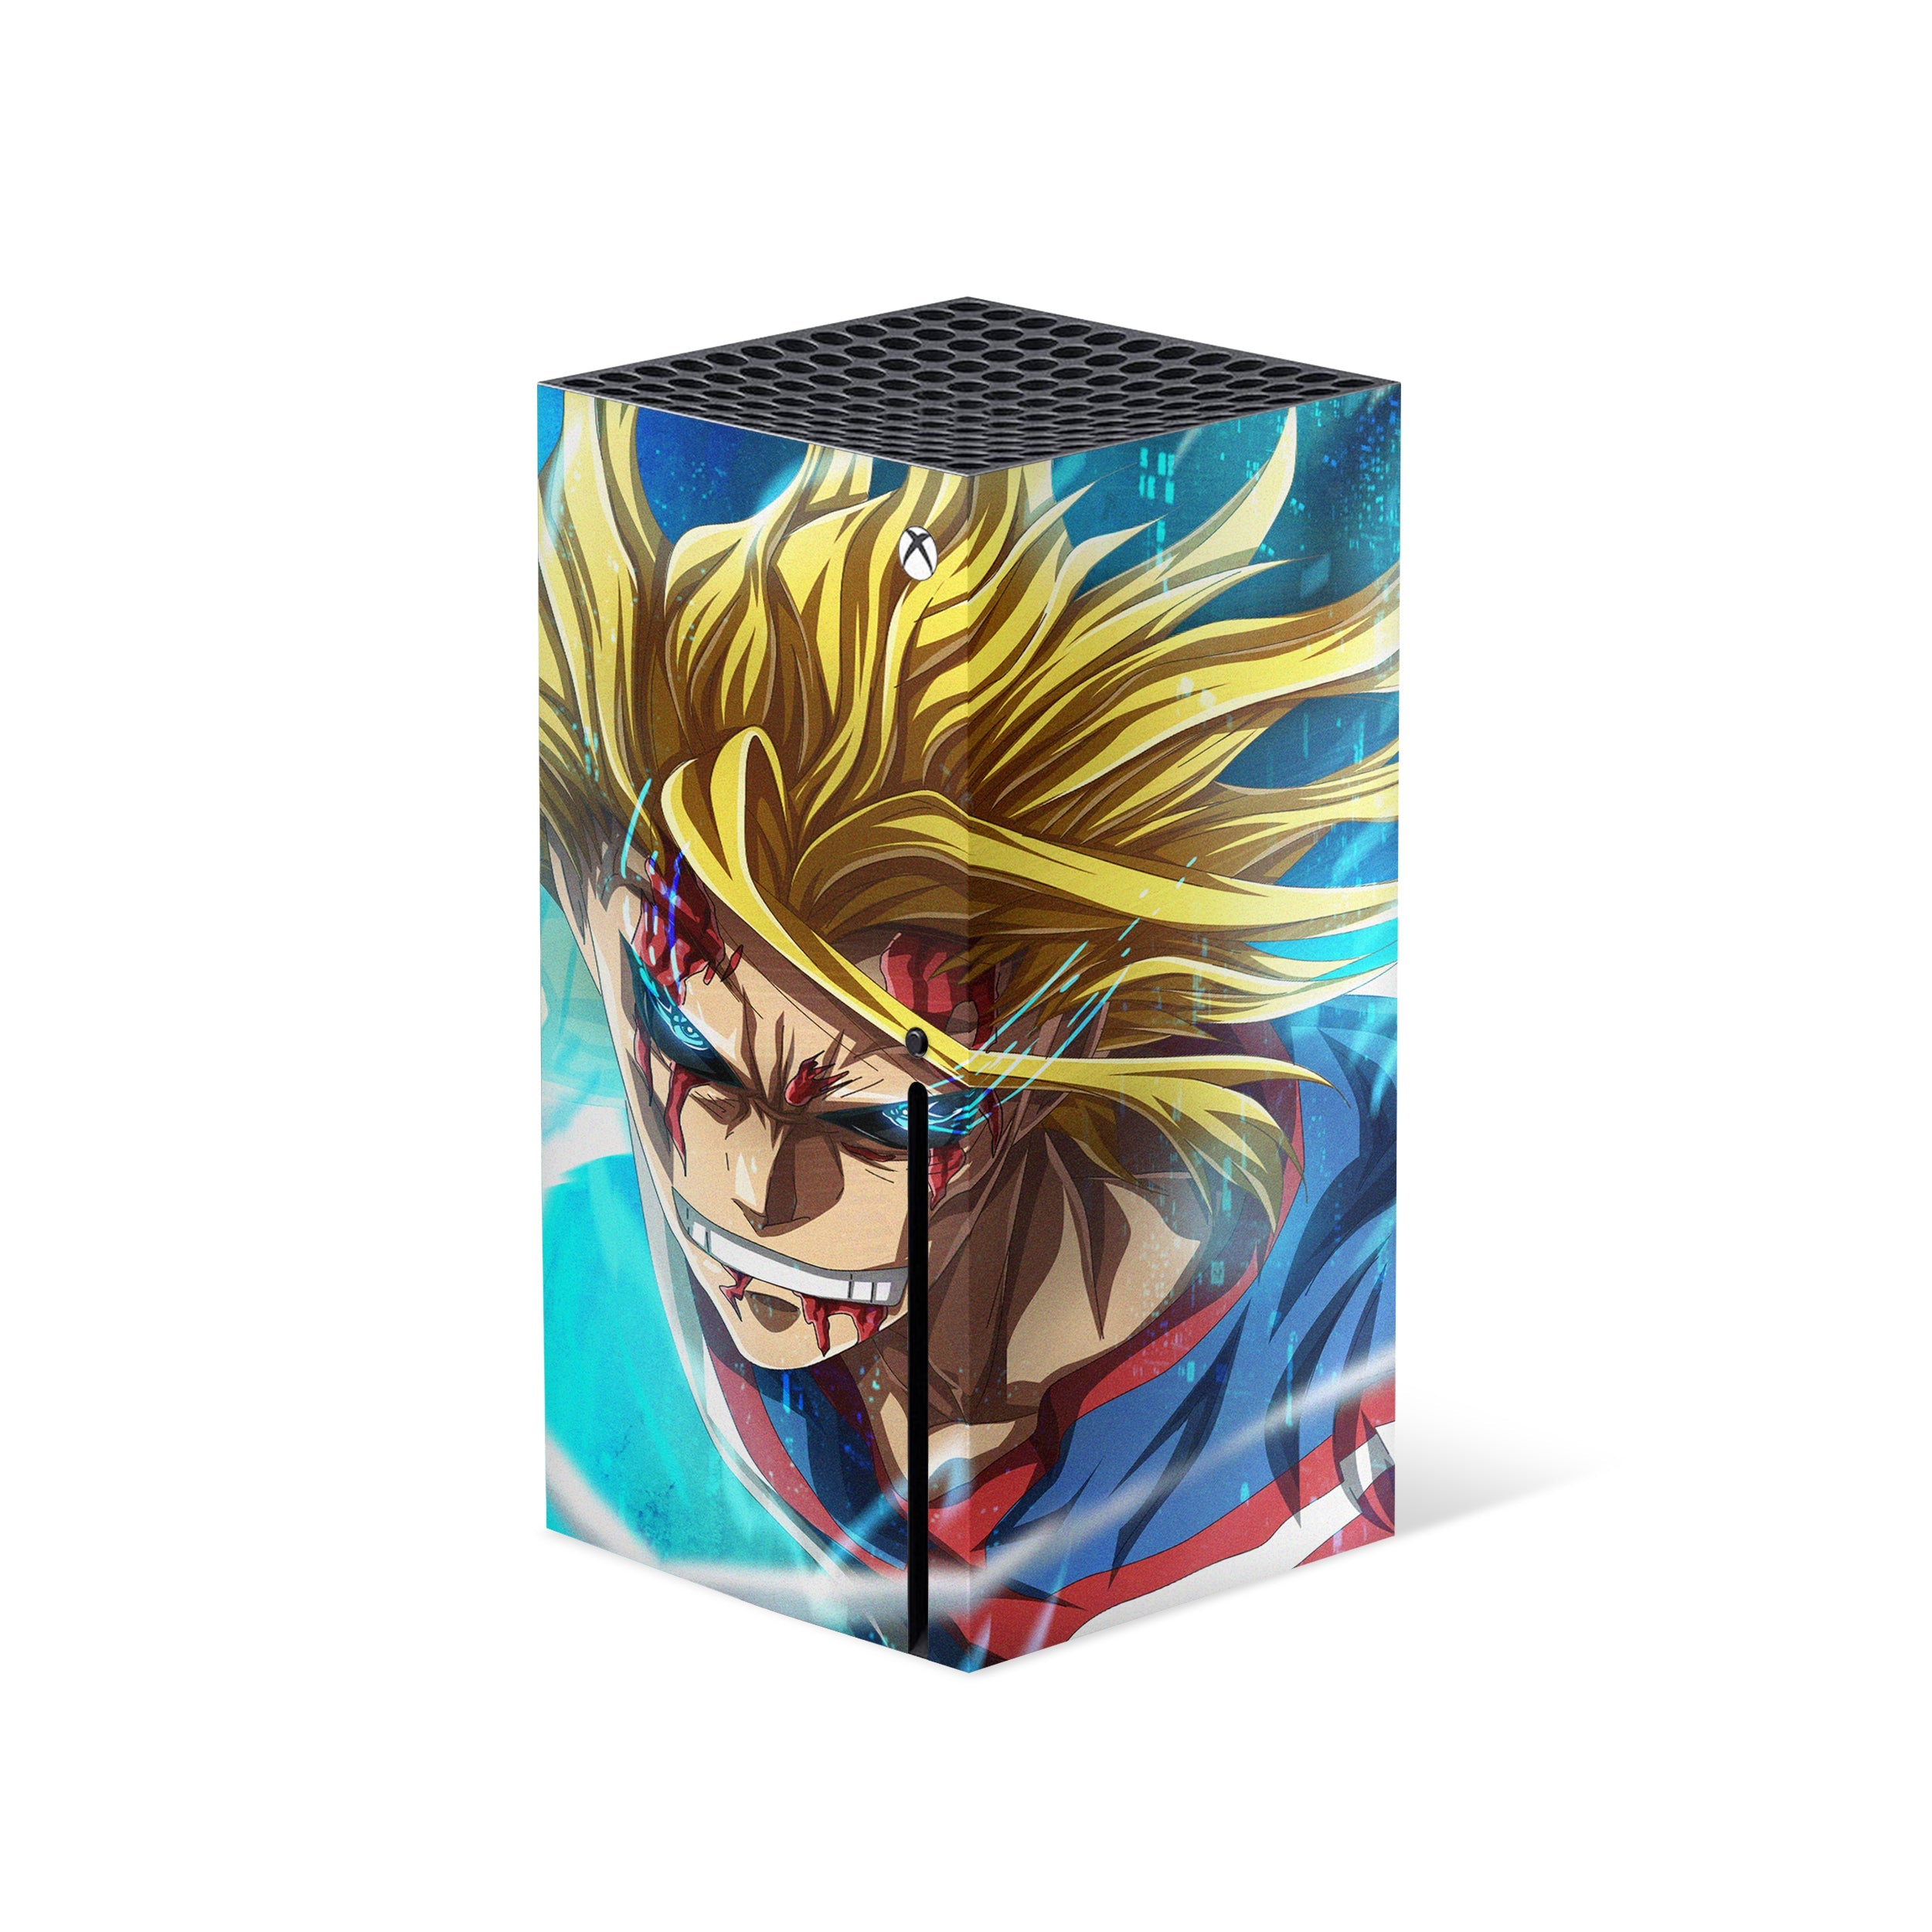 A video game skin featuring a My Hero Academia All Might design for the Xbox Series X.